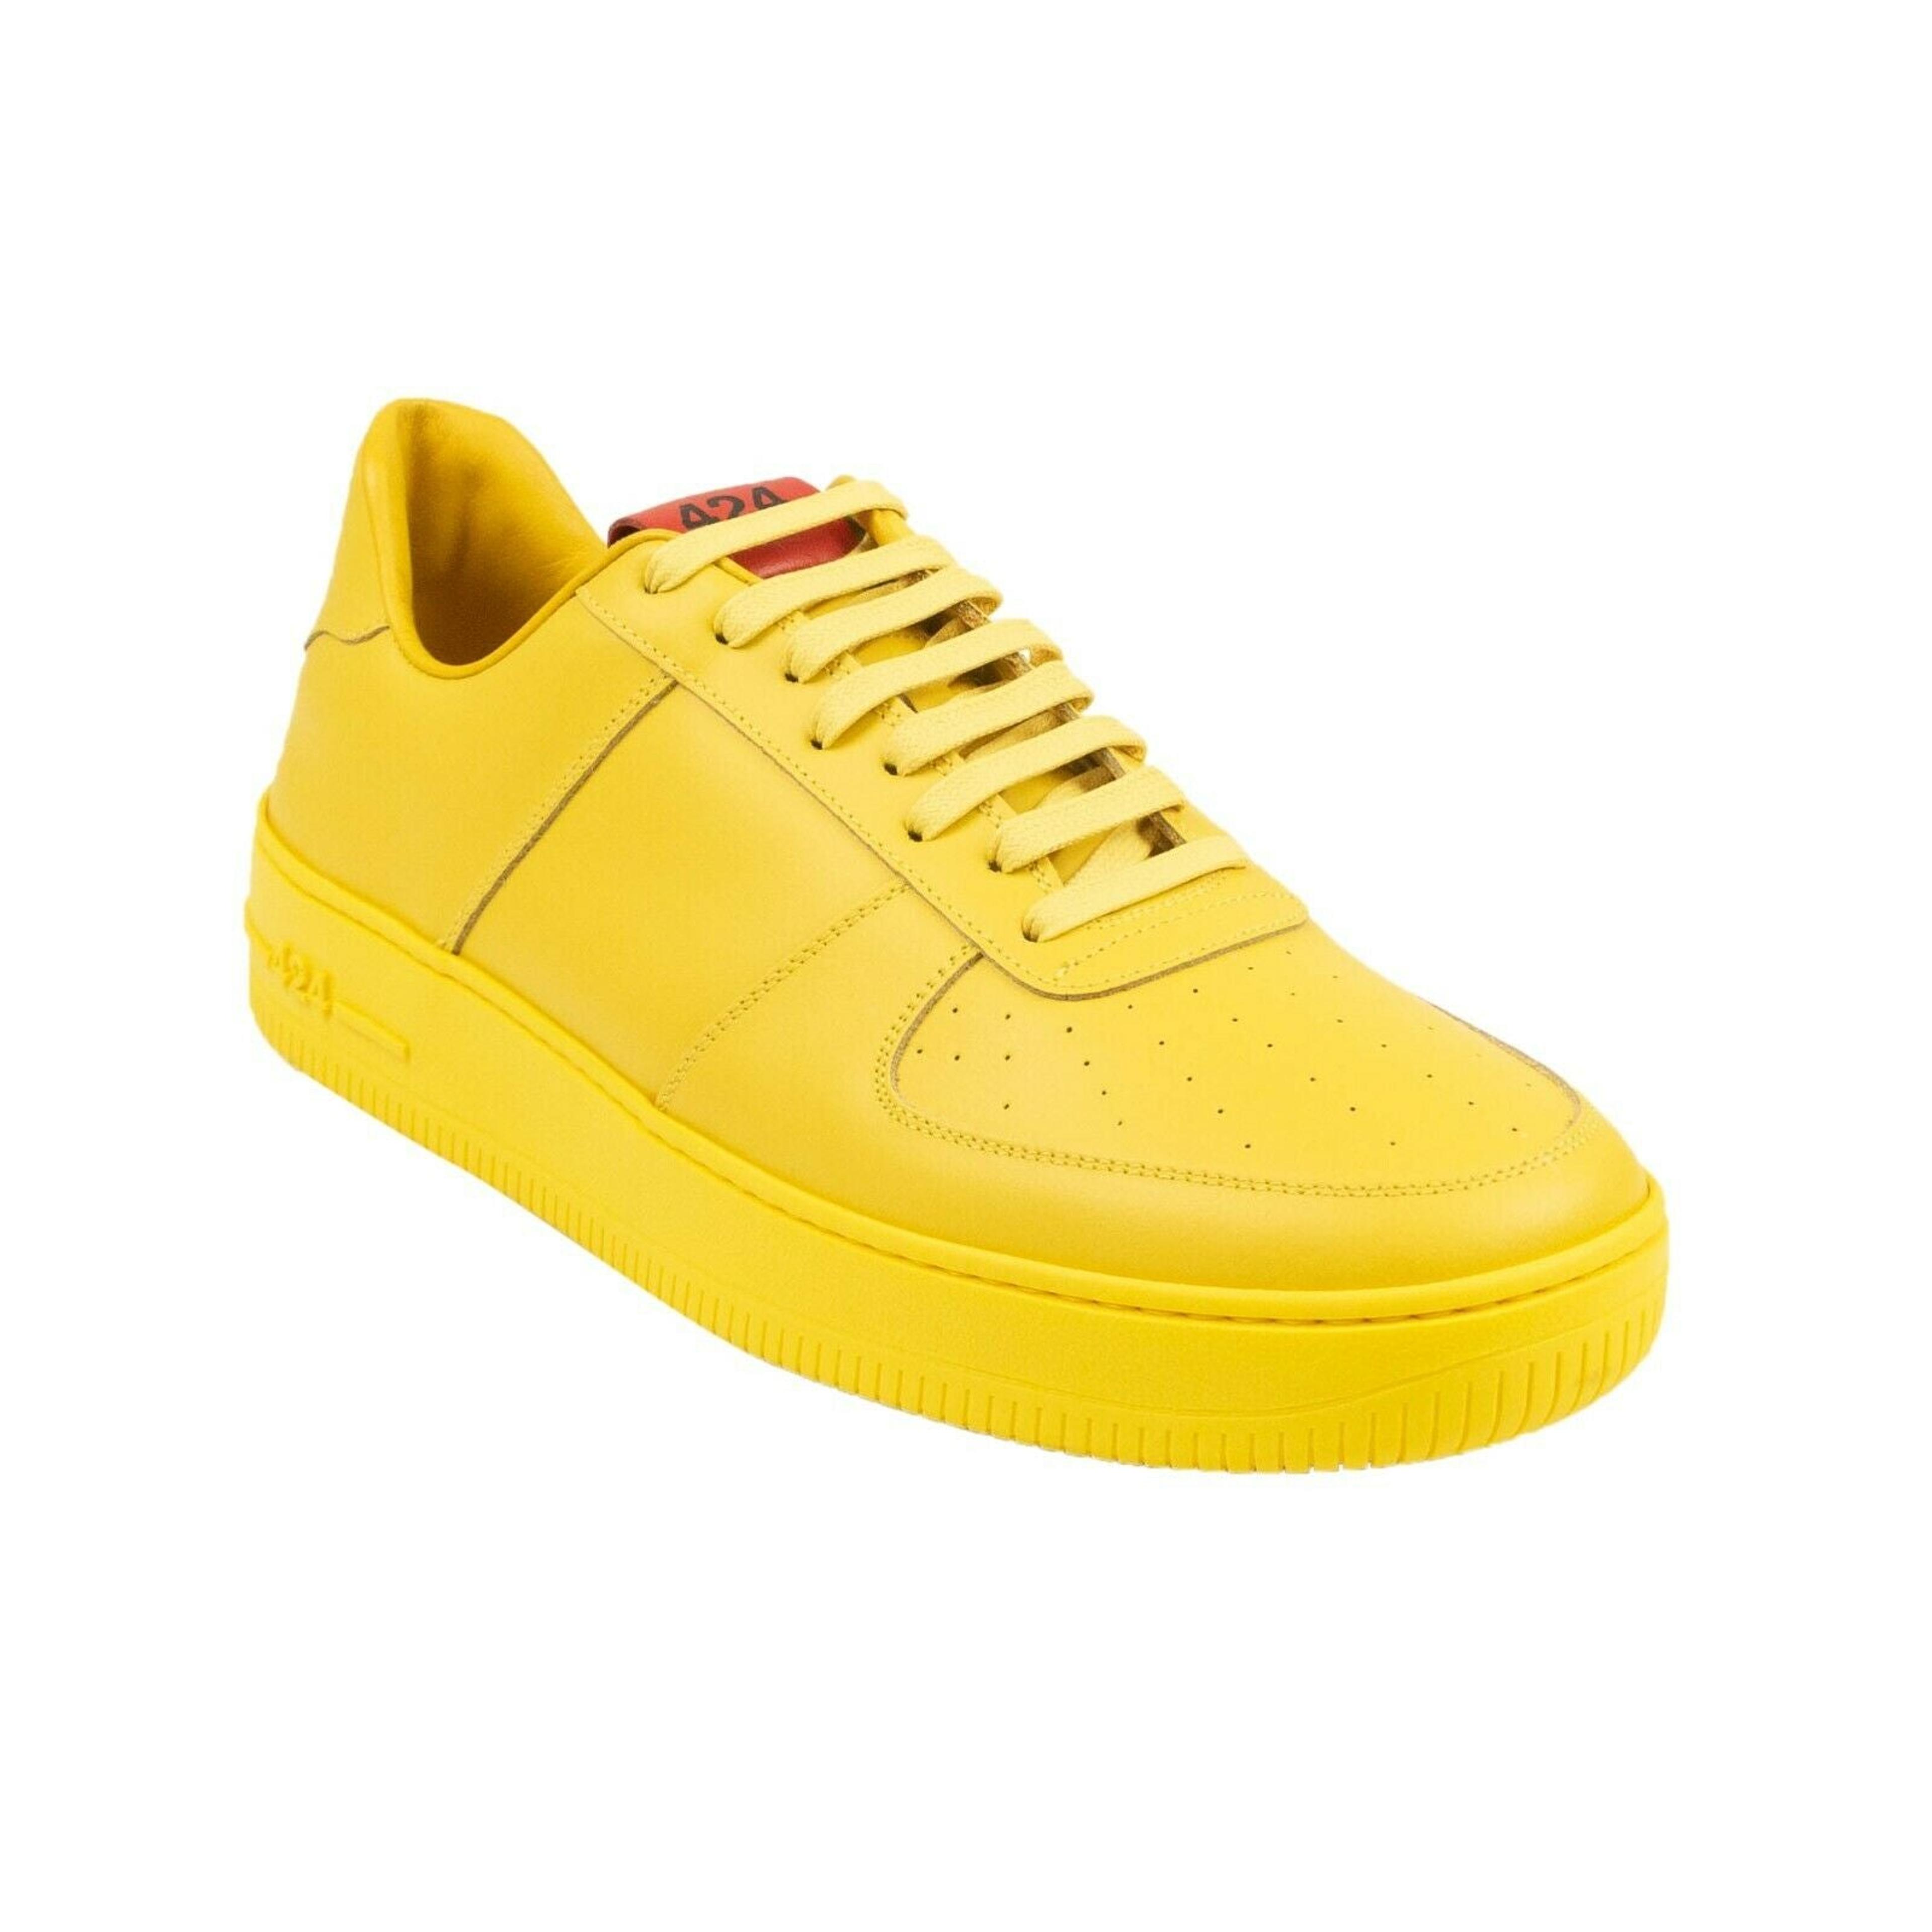 Alternate View 1 of Yellow Leather Low Top Sneakers